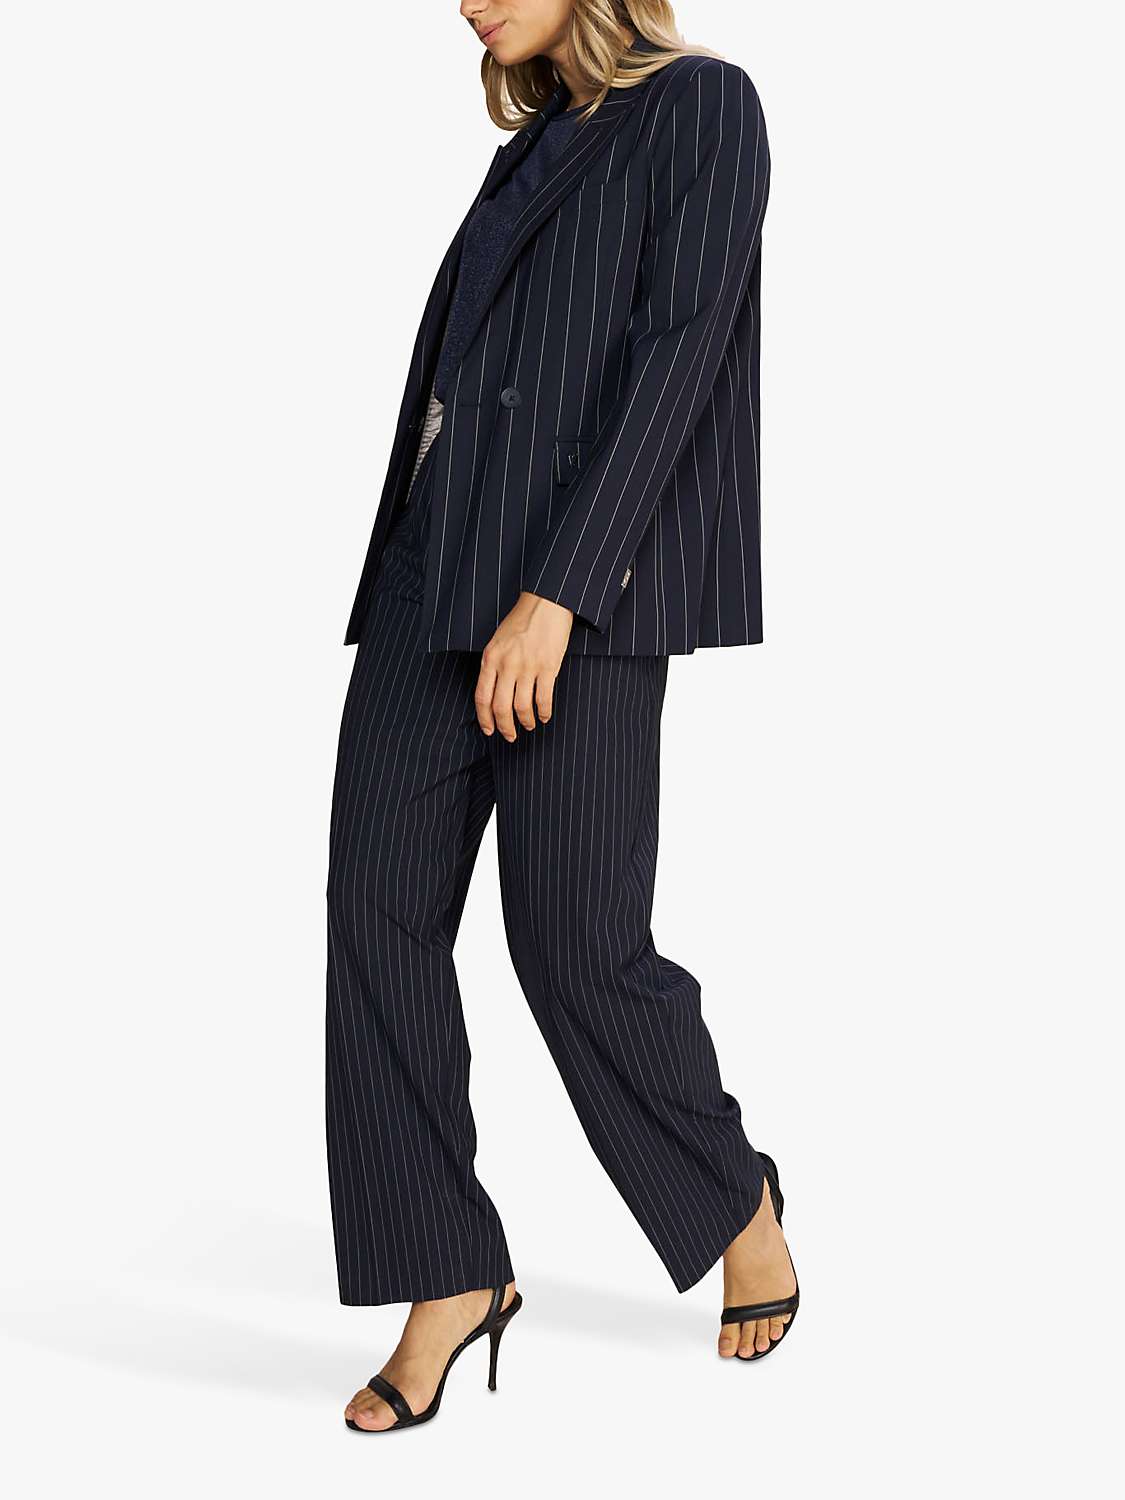 Buy MOS MOSH Arven Roy Pinstripe Trousers, Salute Navy Online at johnlewis.com